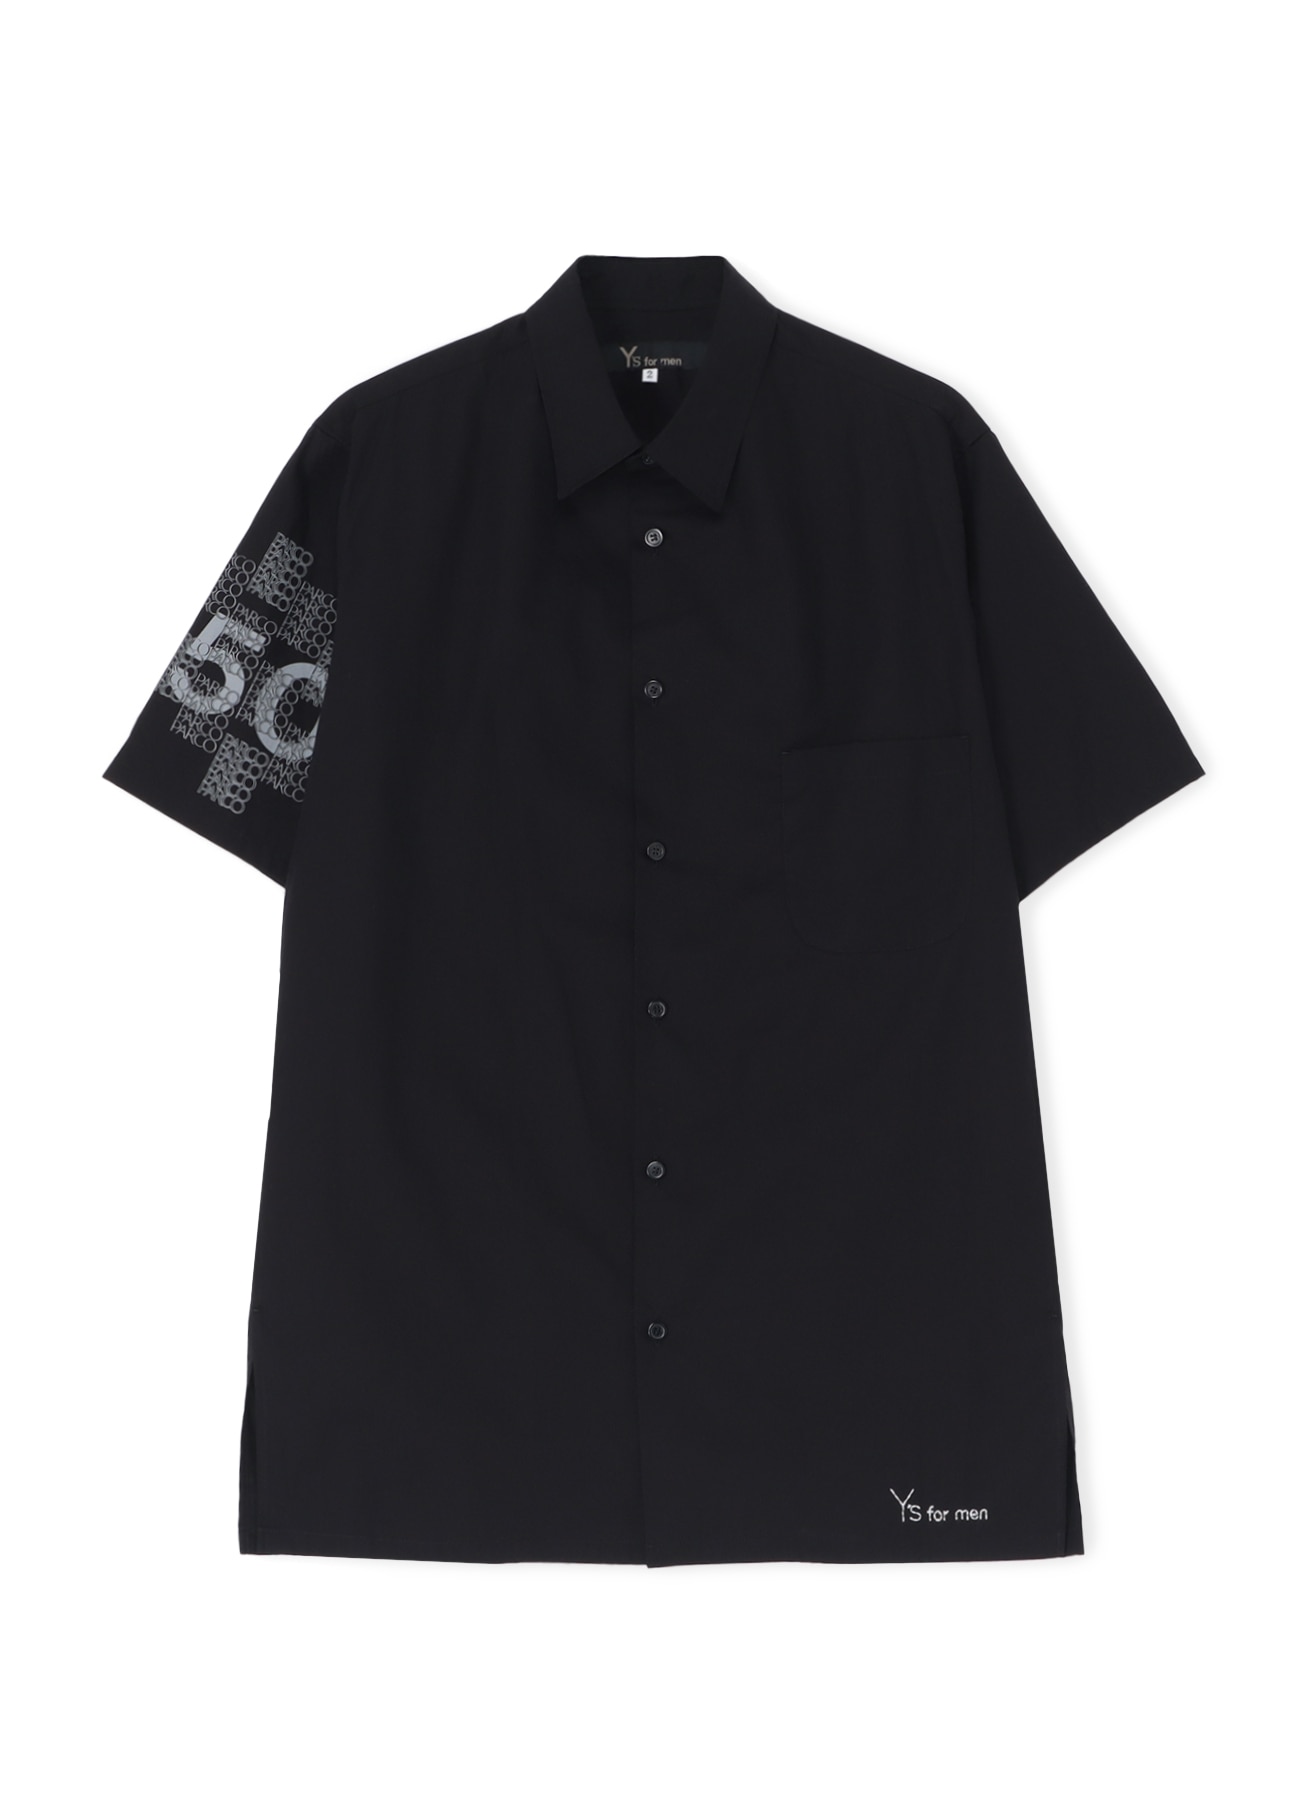 PARCO 50th LIMITED] HALF SLEEVE SHIRT